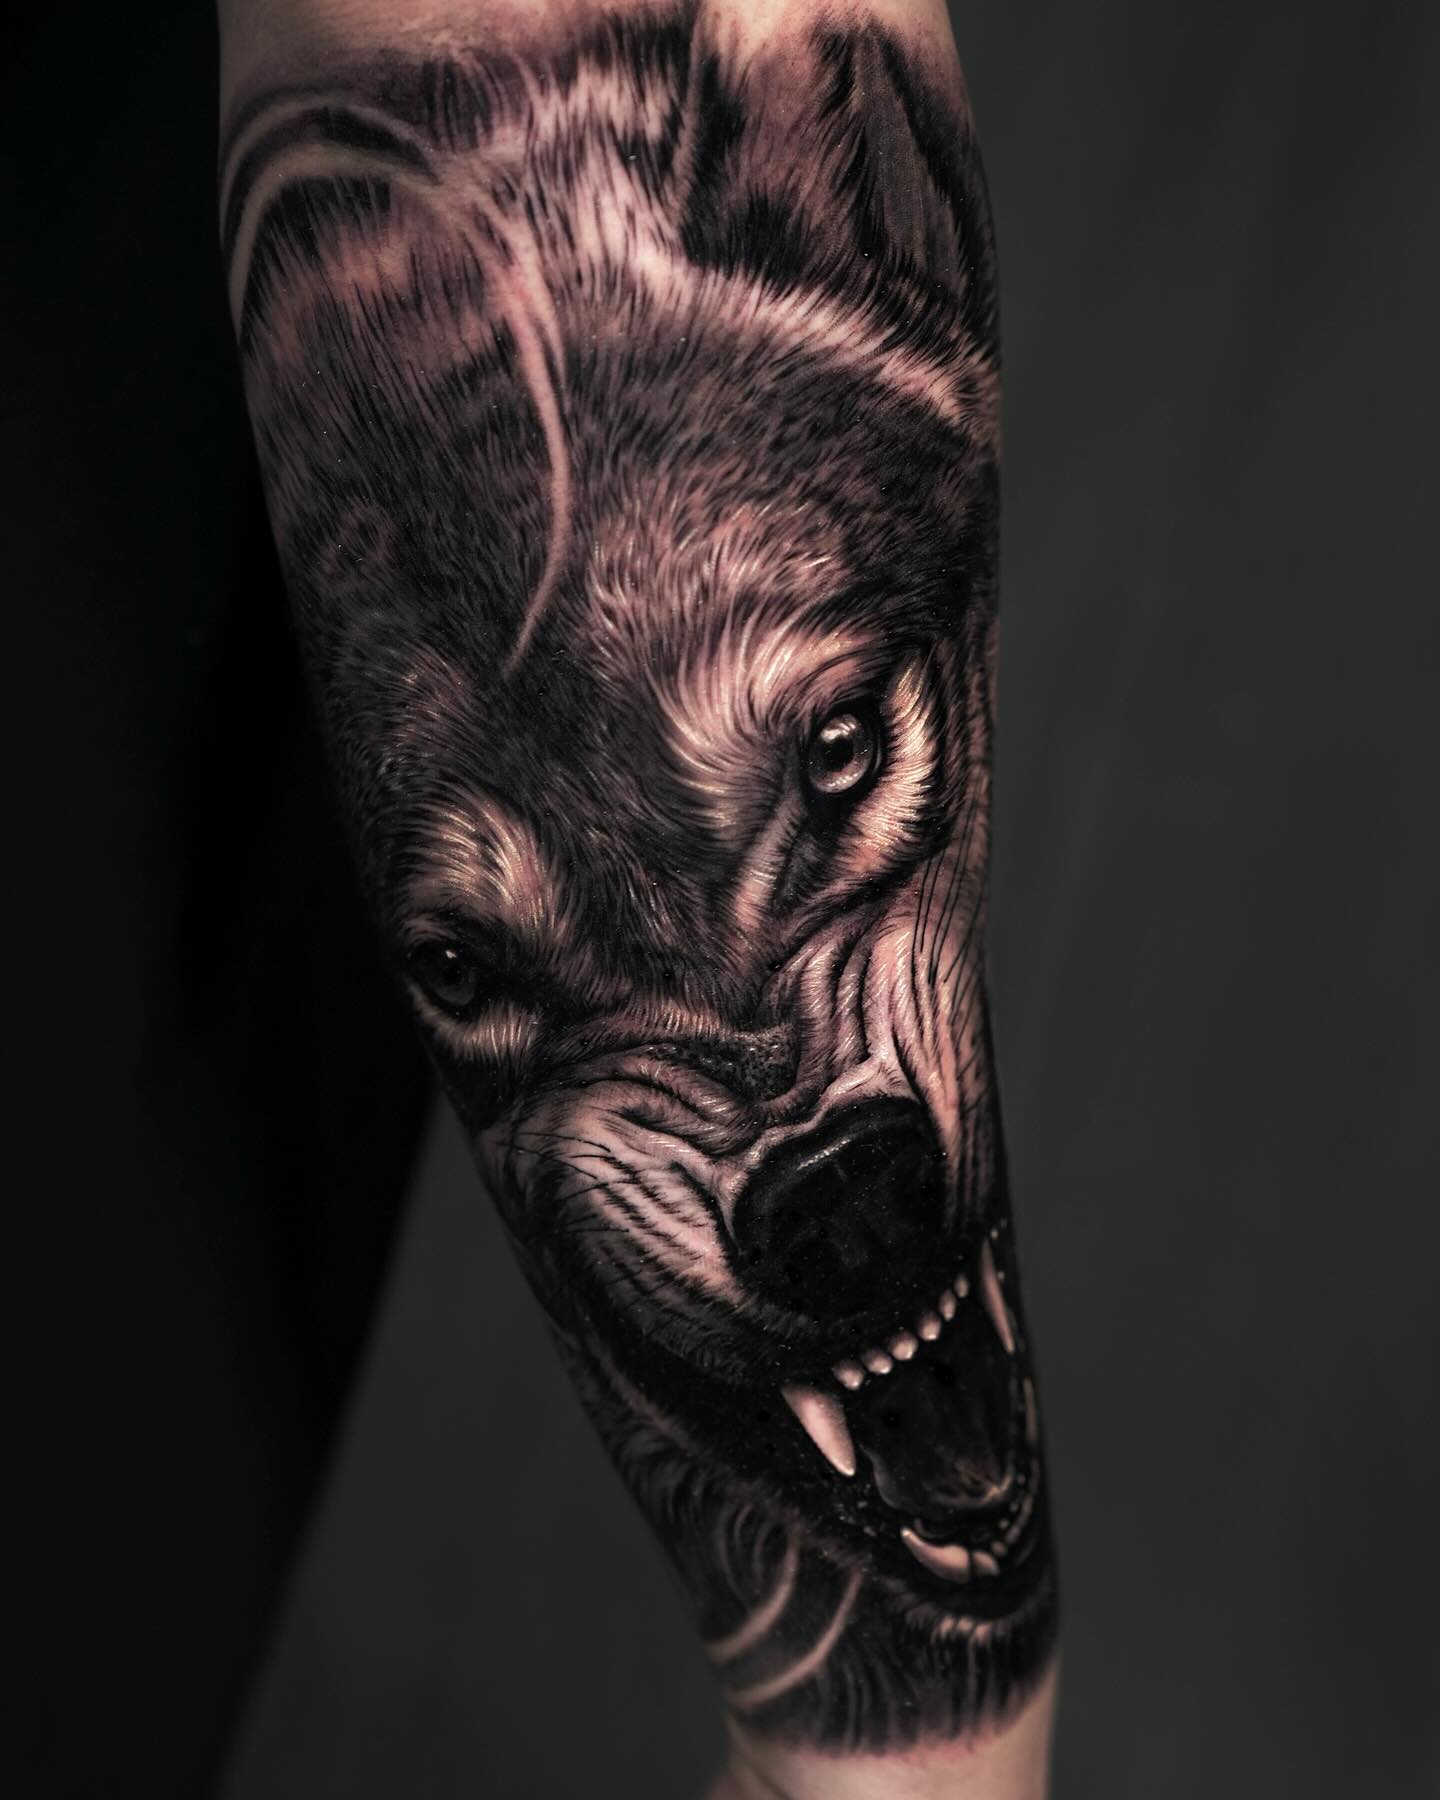 Angry wolf tattoo by Deborah Pow - Tattoogrid.net